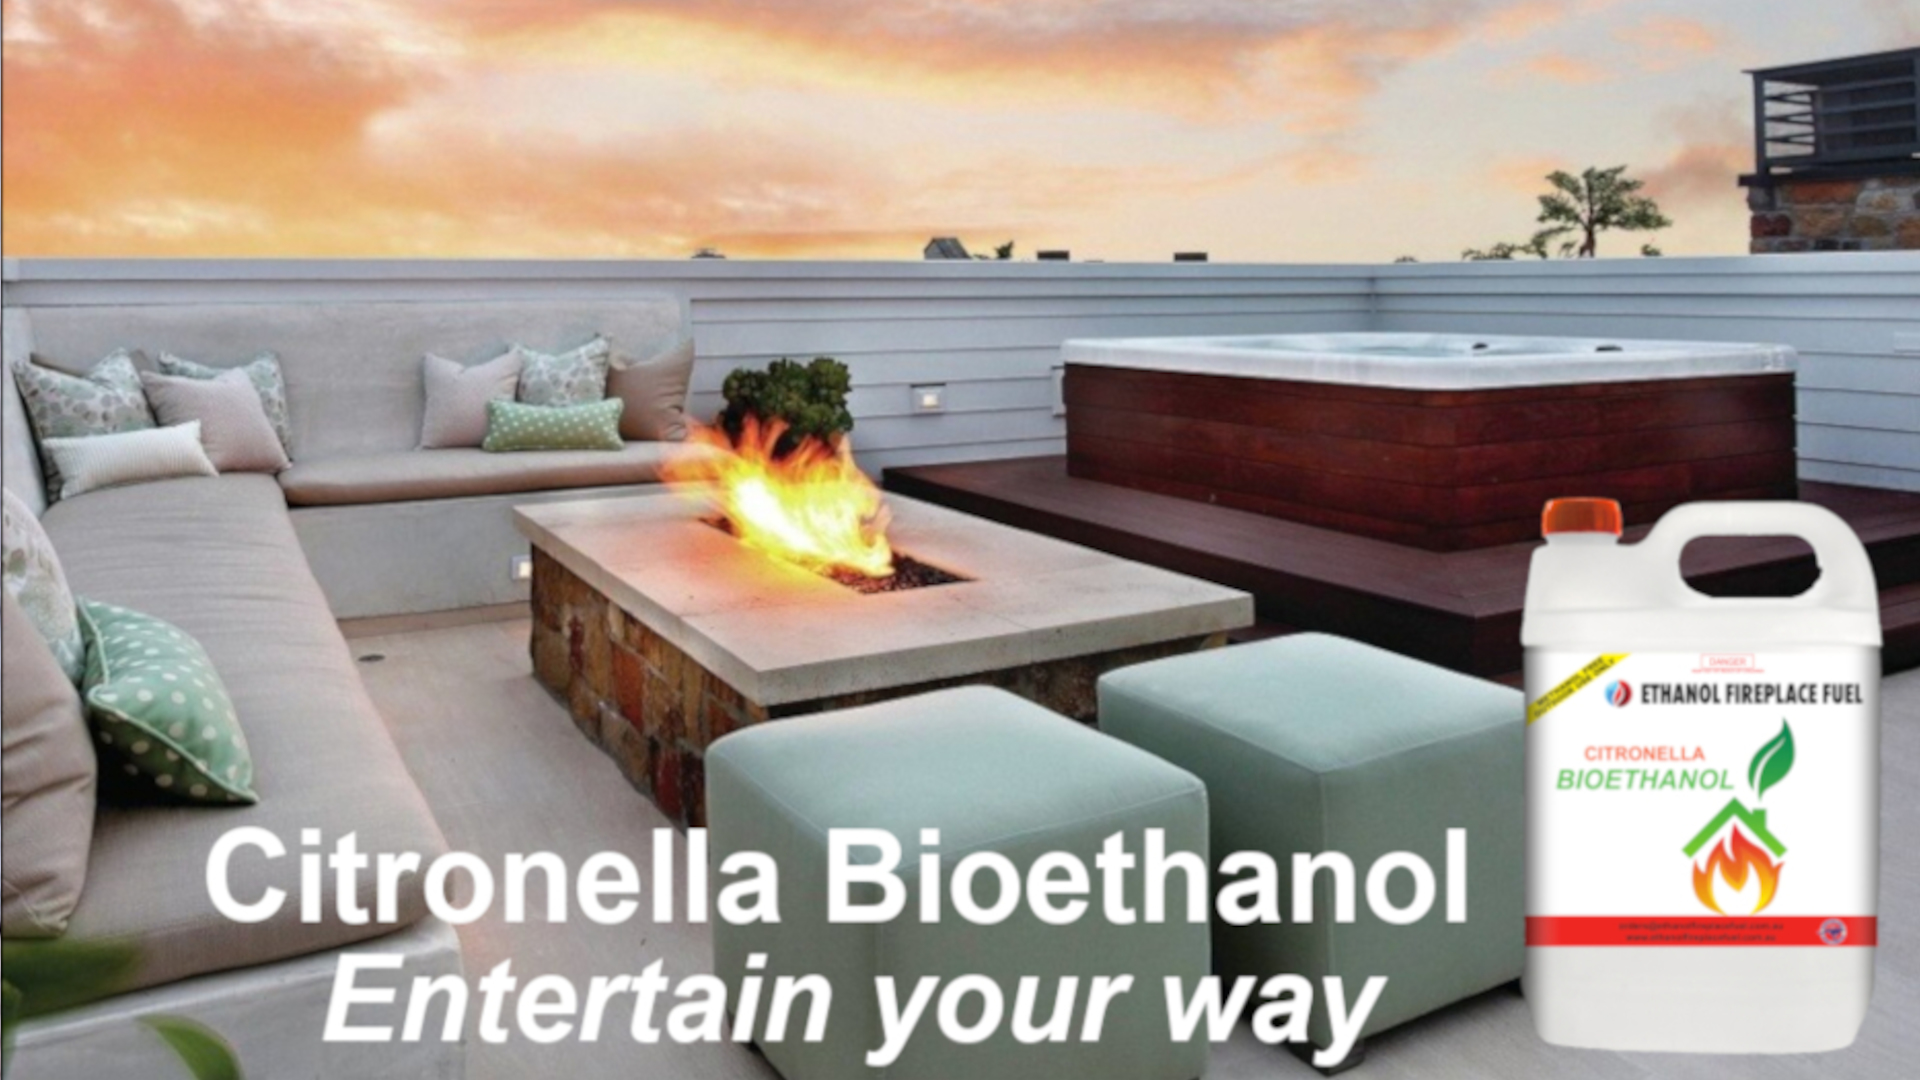 Citronella and Bioethanol Fireplace